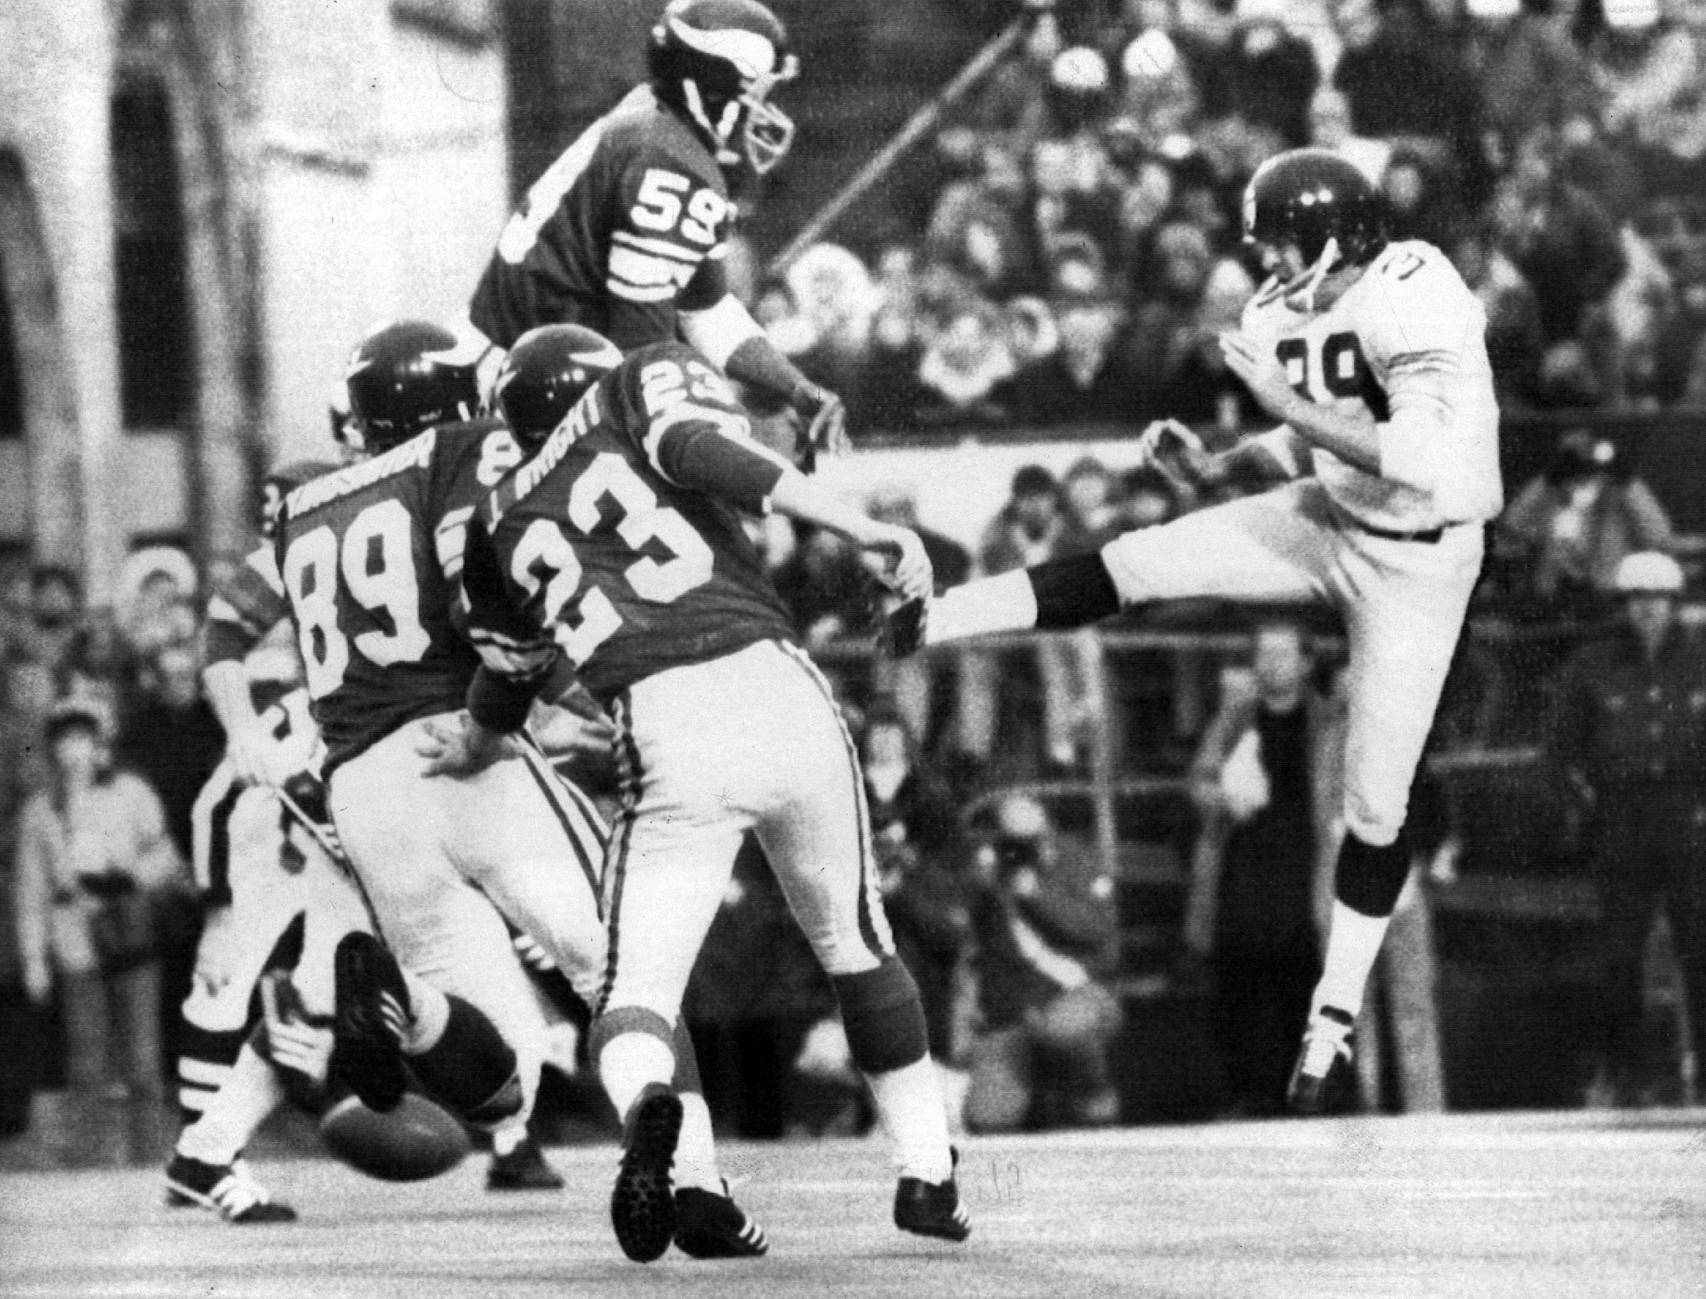 The Vikings' Matt Blair leapt to block an attempted punt by Pittsburgh's Bobby Walden. Terry Brown recovered in the end zone for Minnesota's only score in Super Bowl IX.